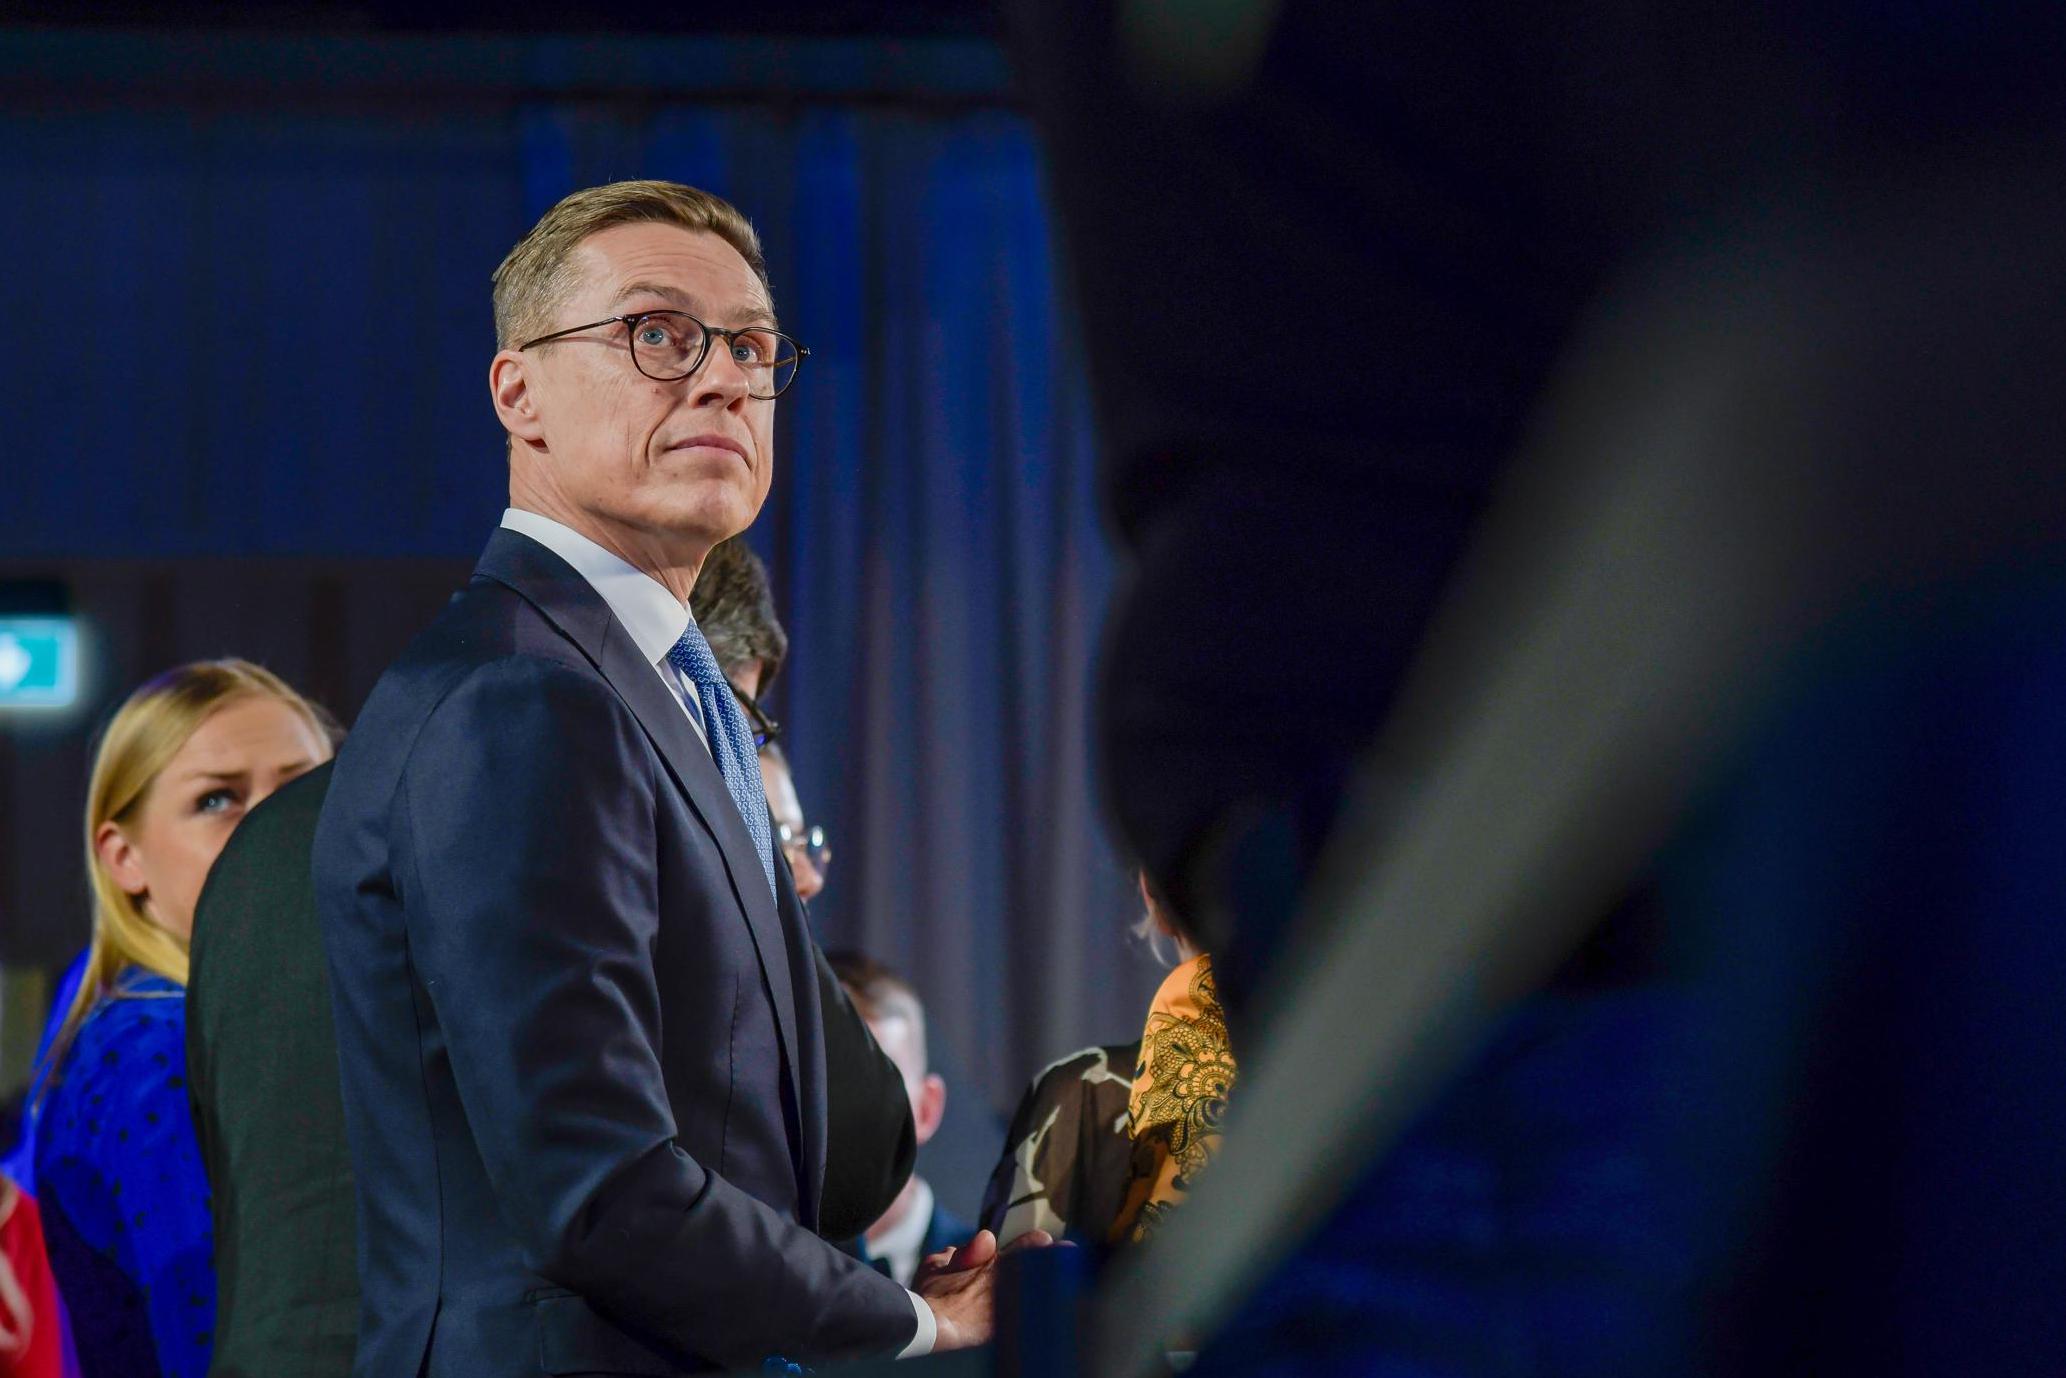 Finland’s presidential election victory goes to Alexander Stubb